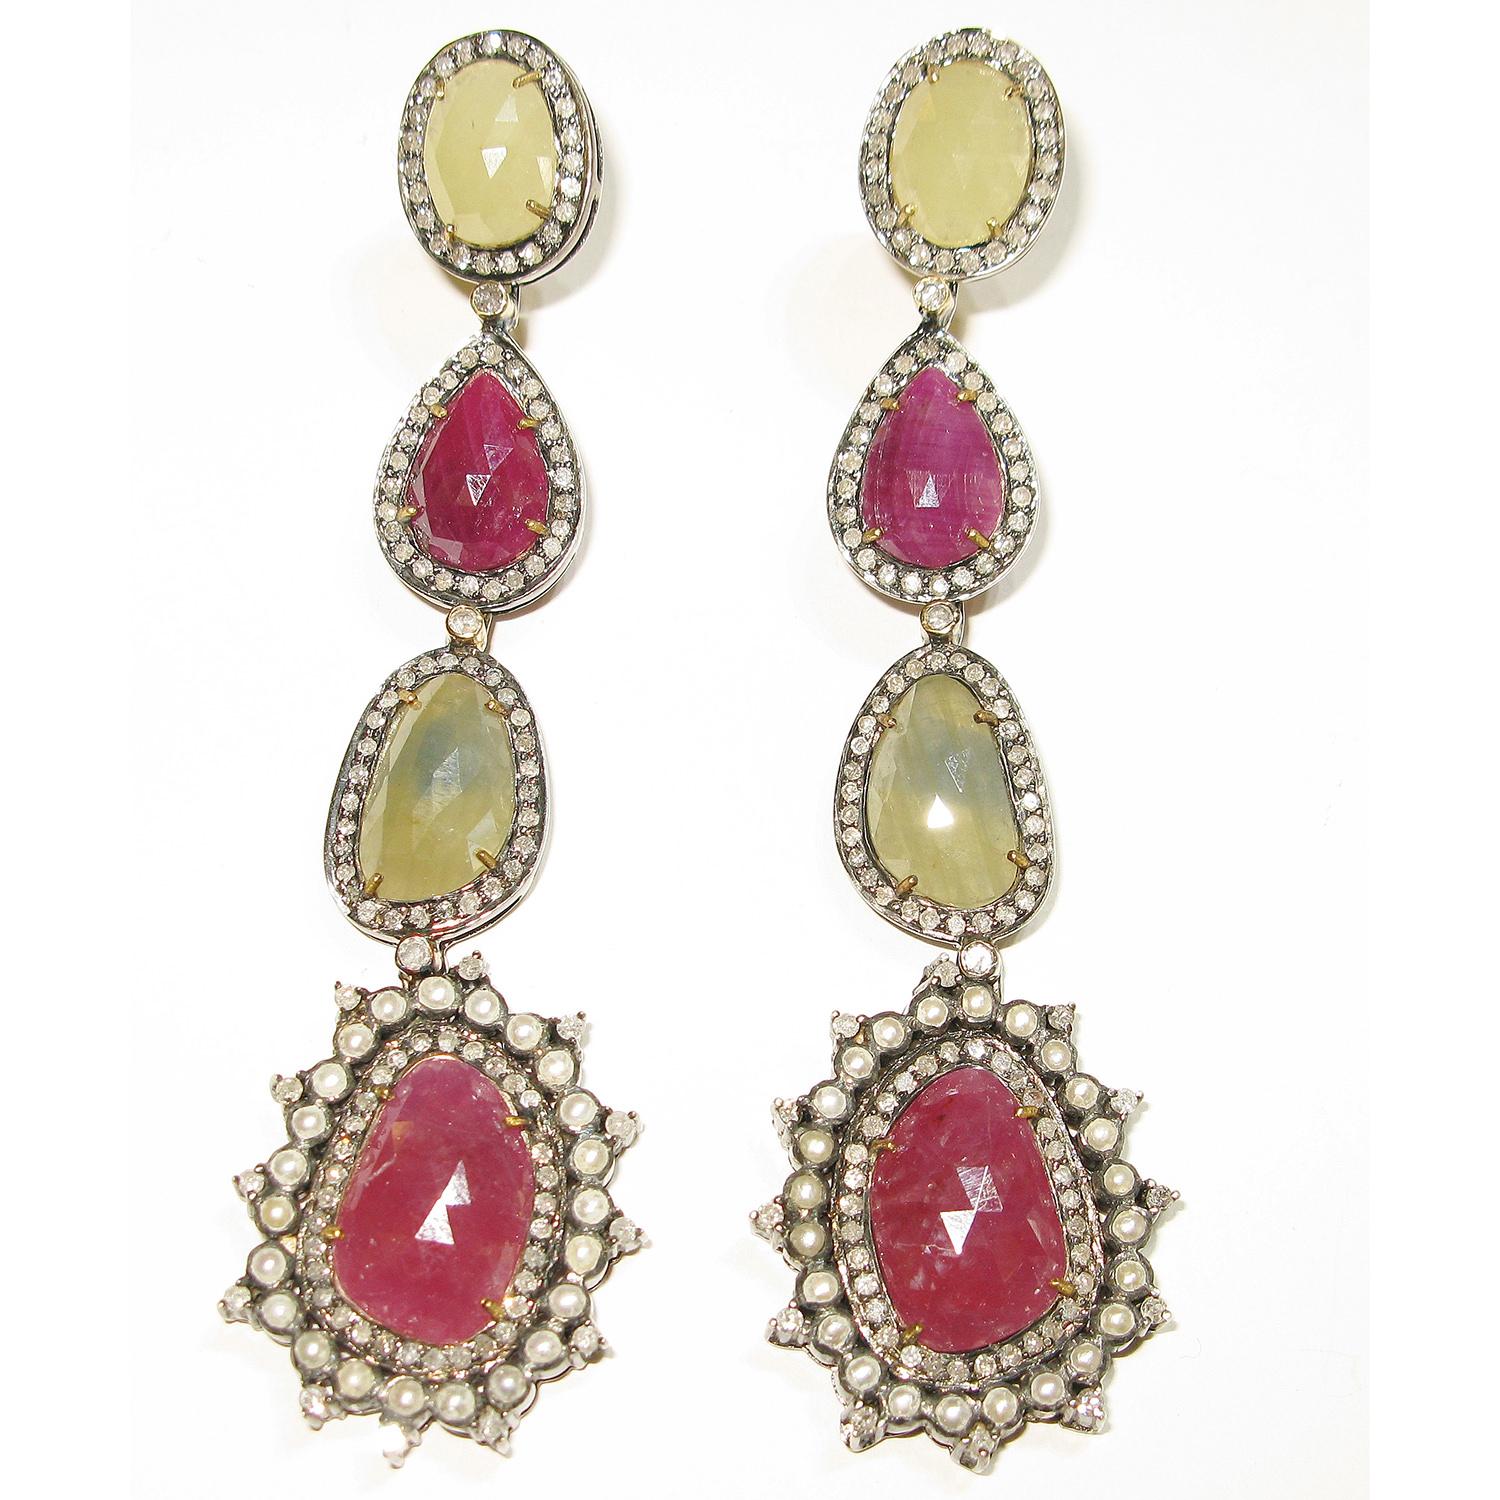 Multi Shaped Gemstone Earrings with Pave Diamonds Made in 18k Gold & Silver In New Condition For Sale In New York, NY